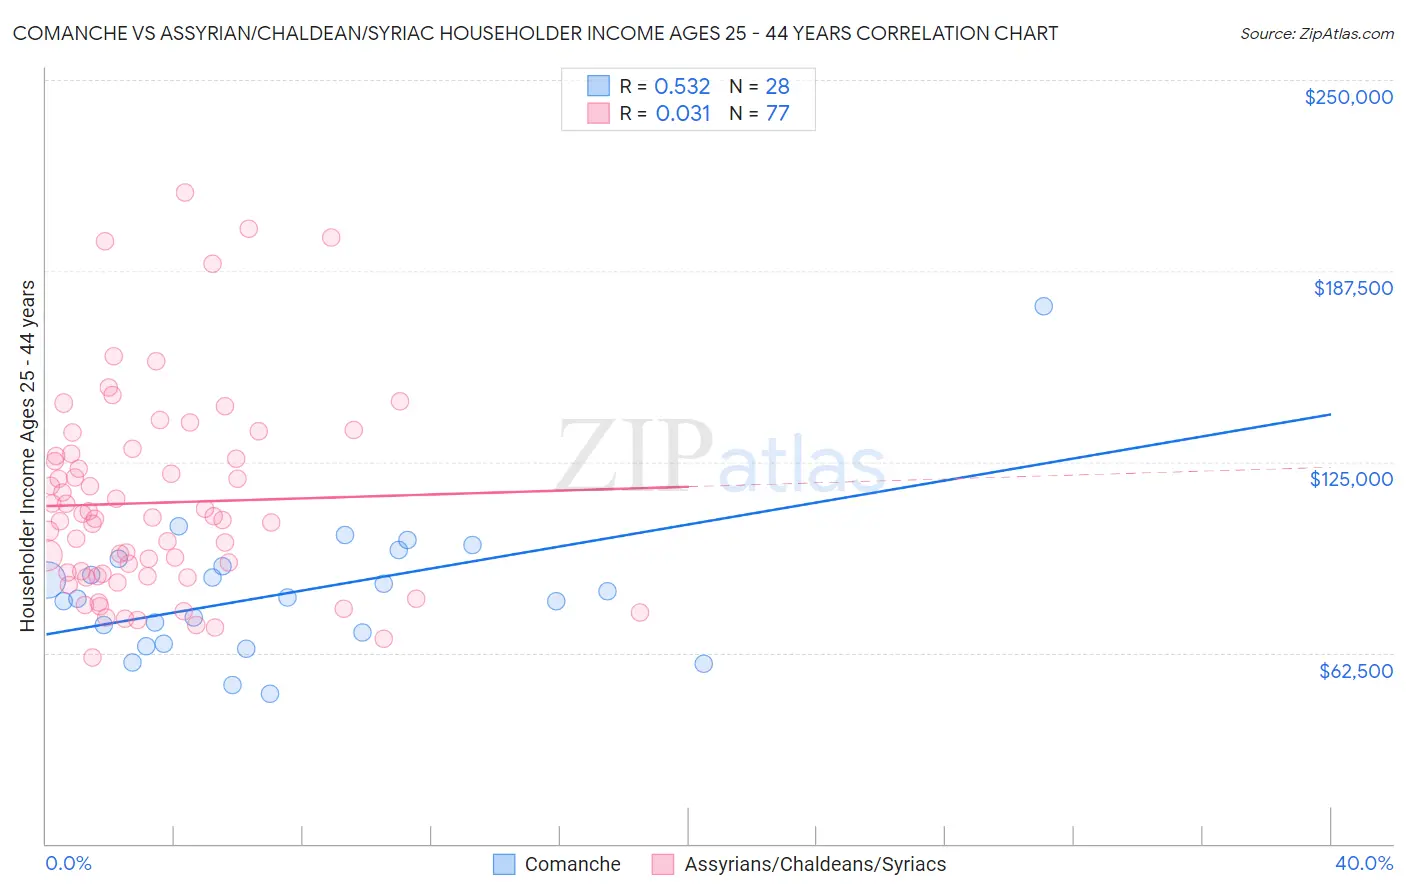 Comanche vs Assyrian/Chaldean/Syriac Householder Income Ages 25 - 44 years